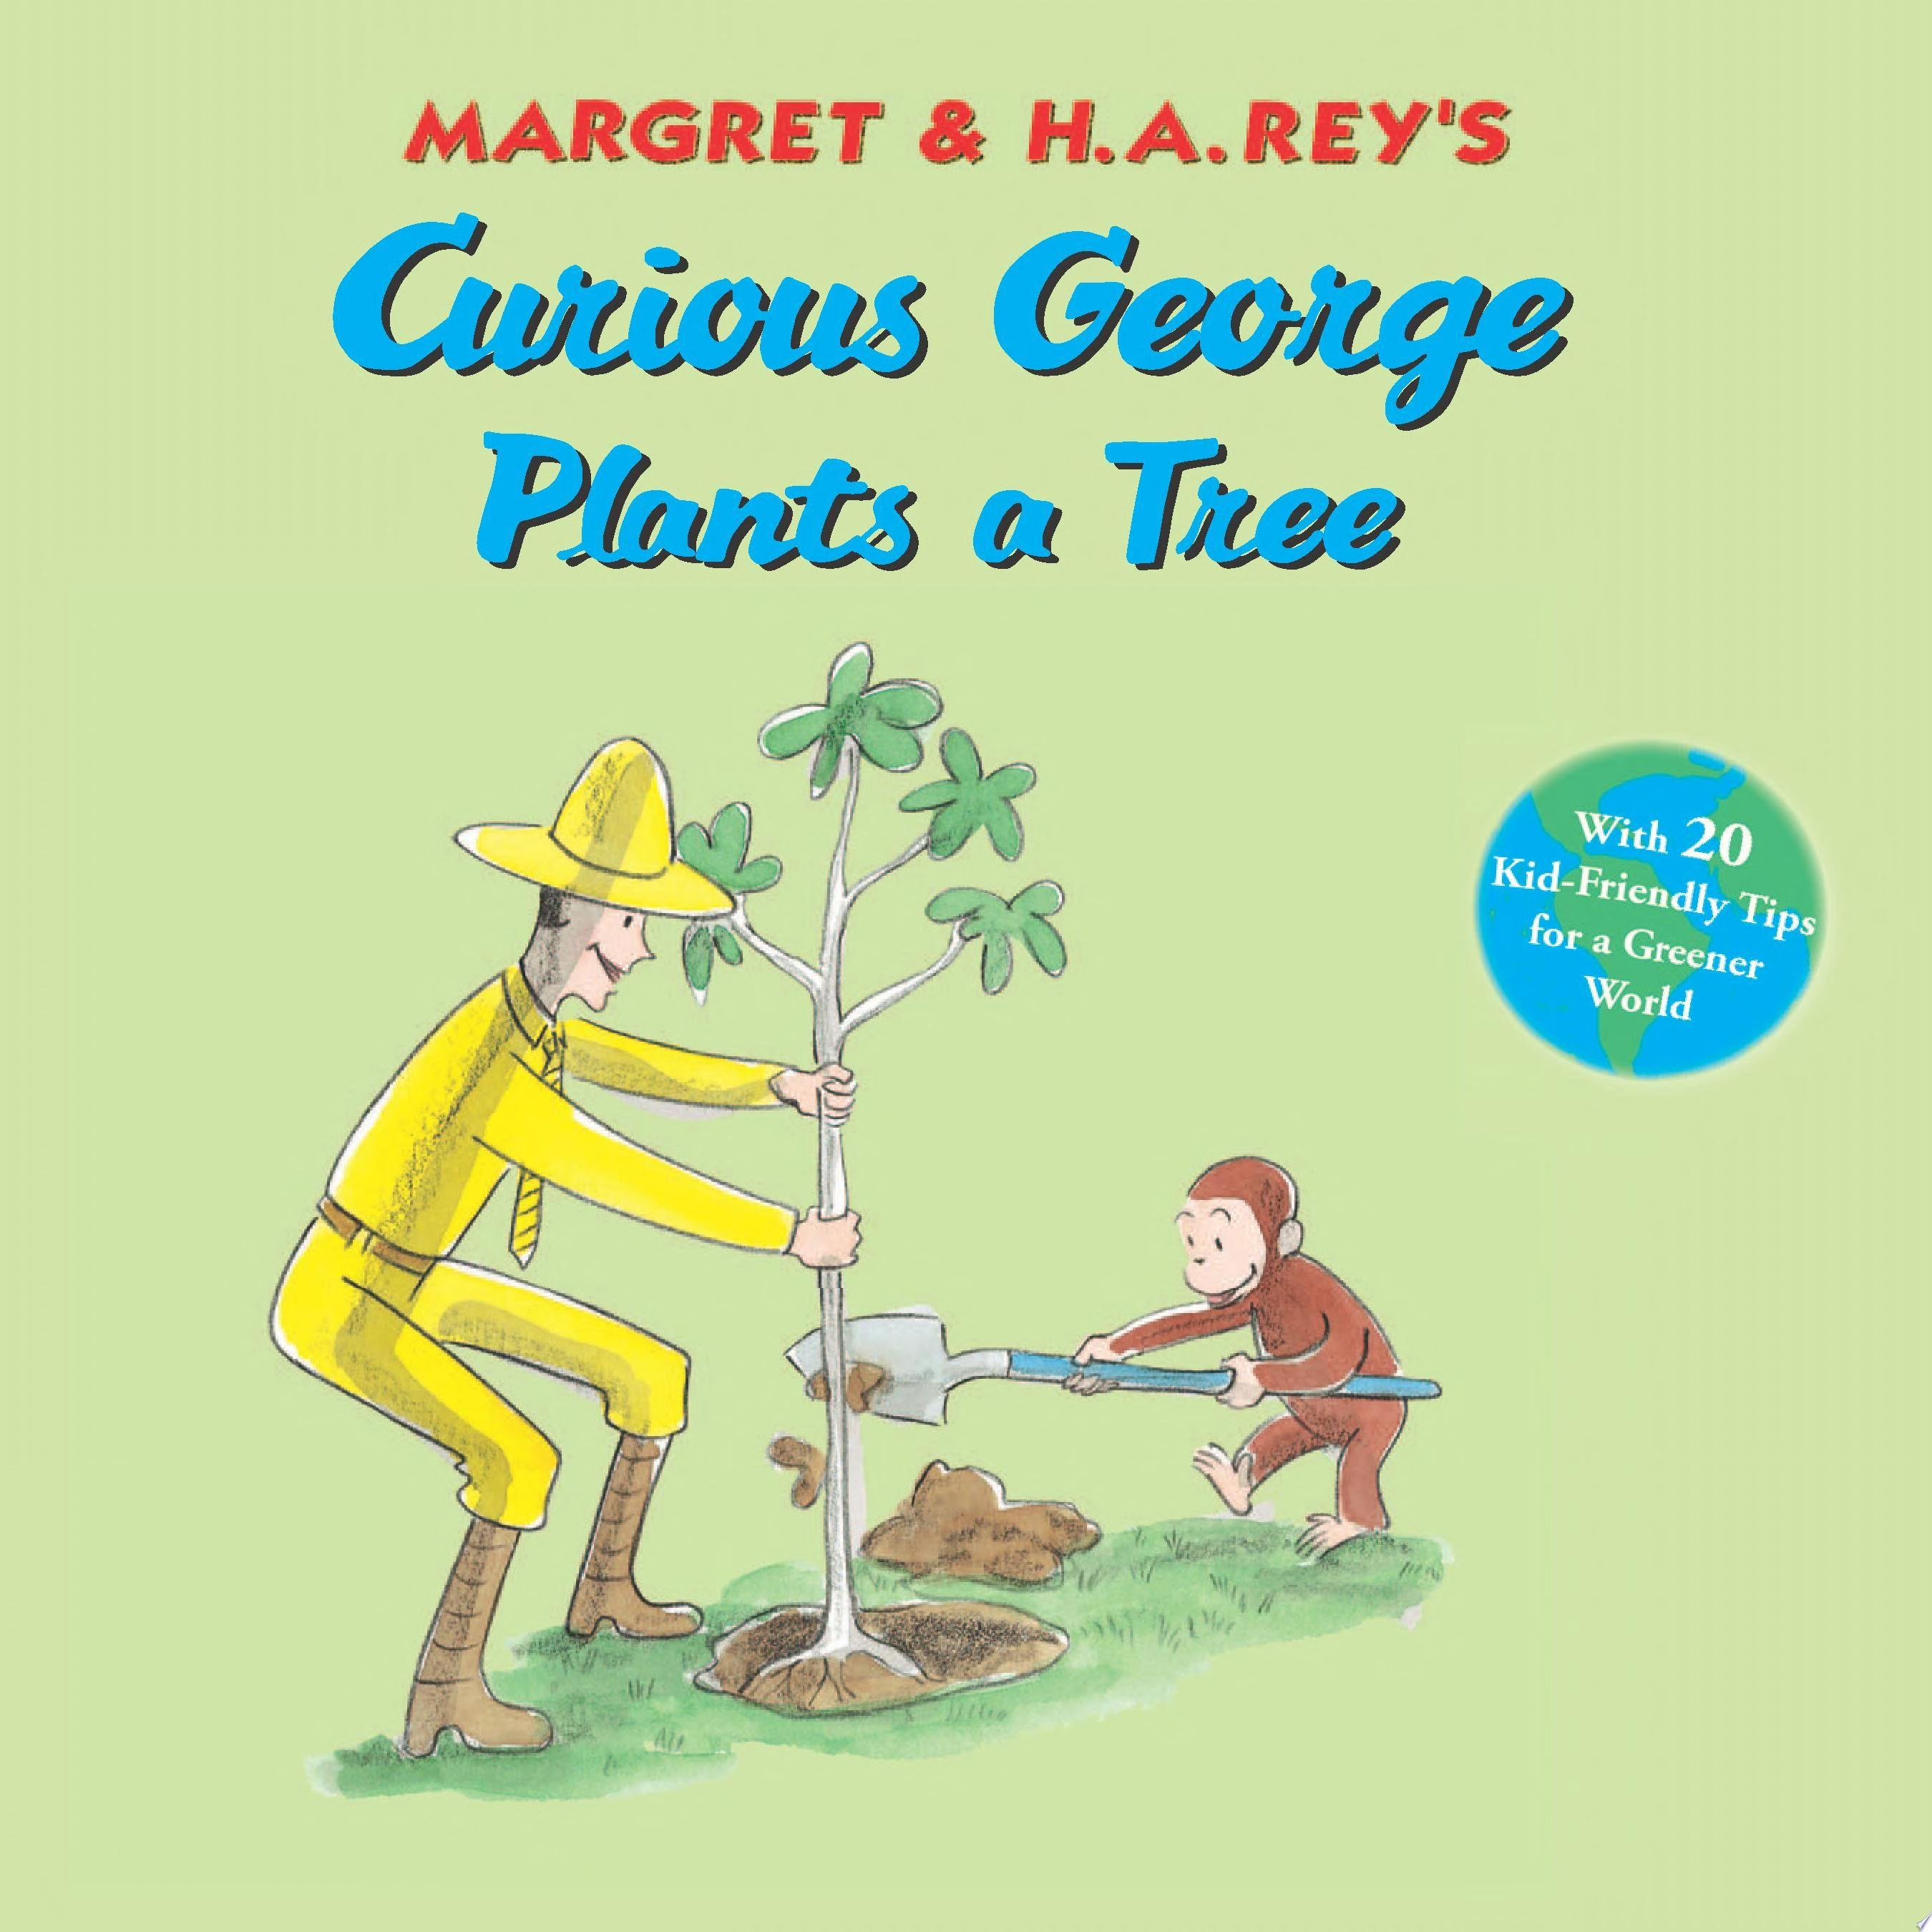 Image for "Curious George Plants a Tree"